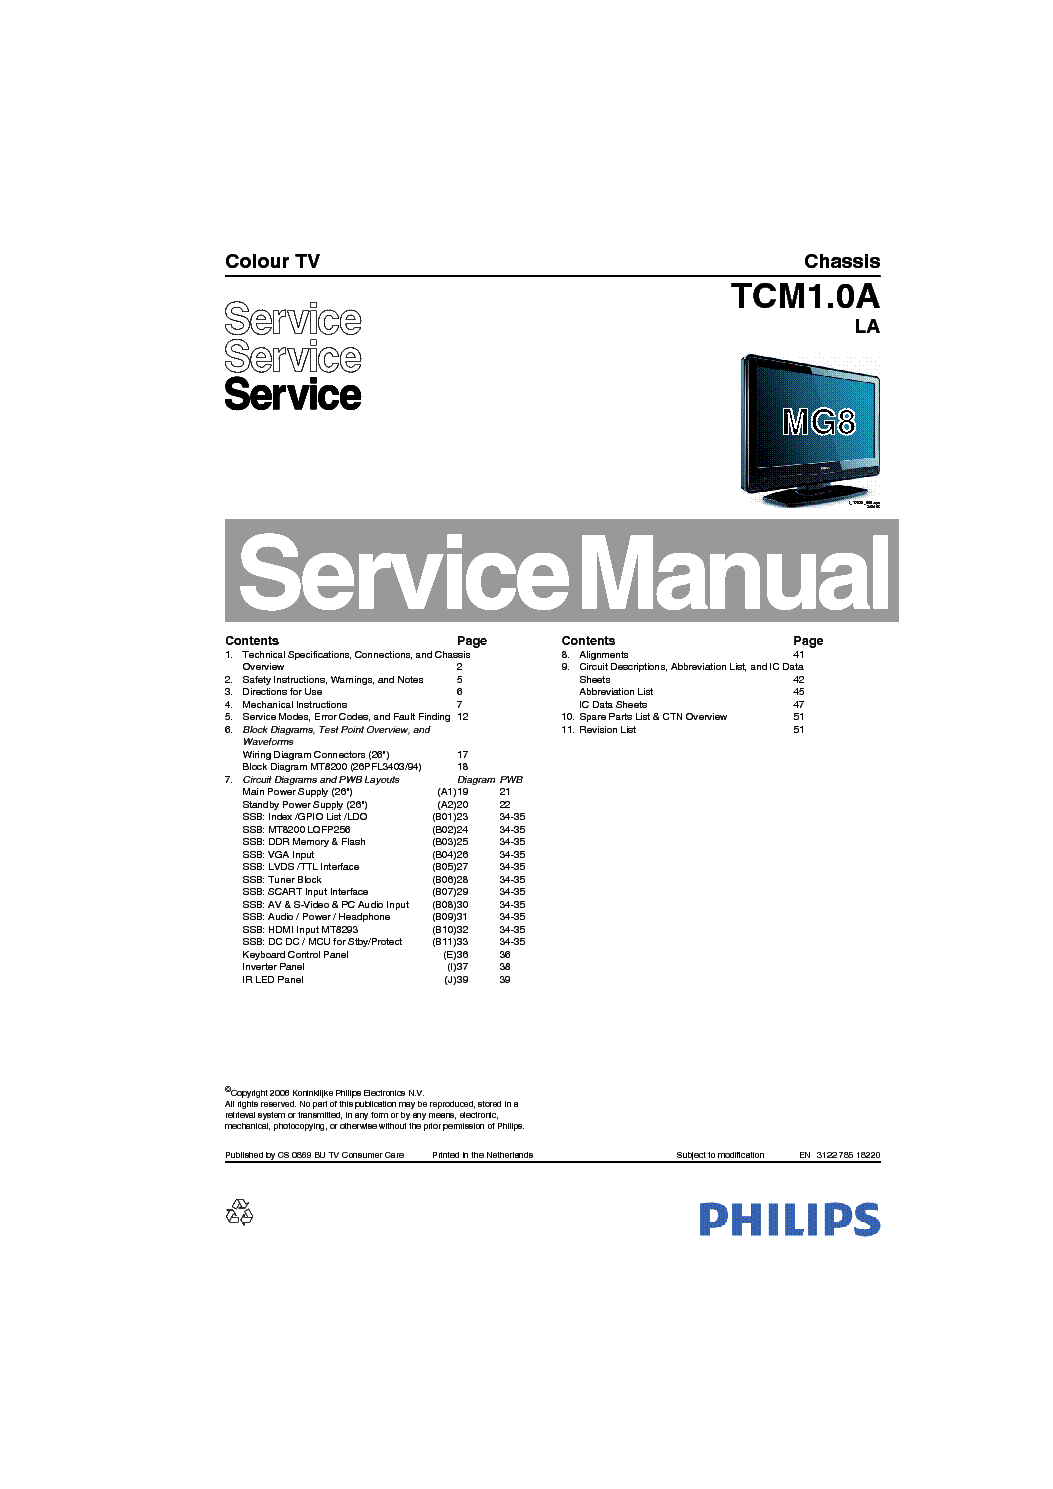 PHILIPS TCM1.0A LA CHASSIS LCD TV SM service manual (1st page)